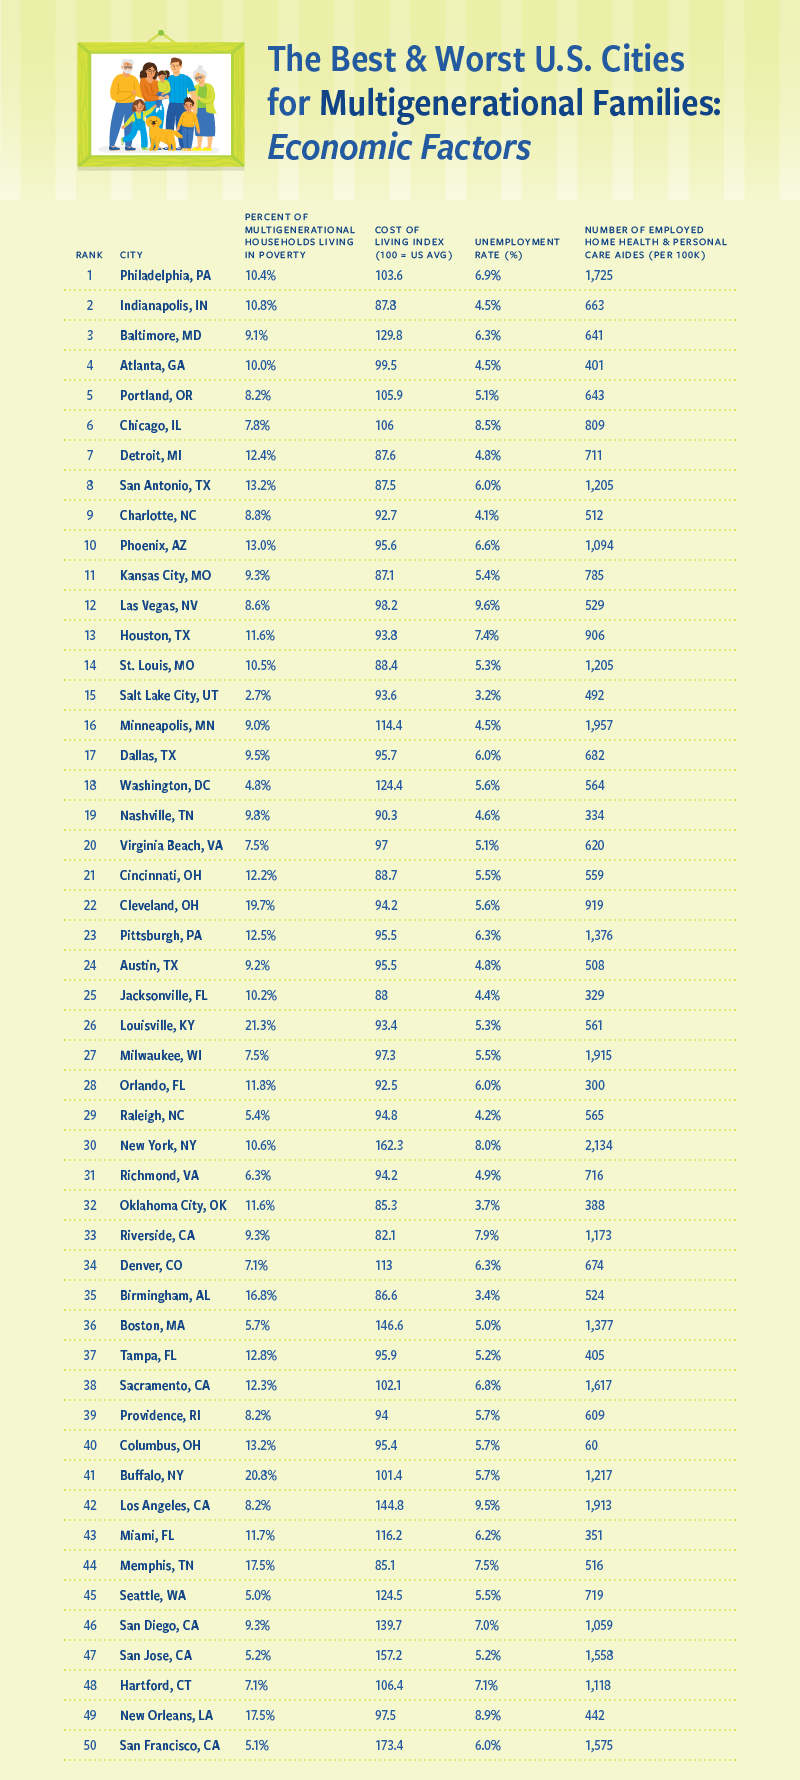 A table of economic factors for the best and worst U.S. cities for multigenerational families